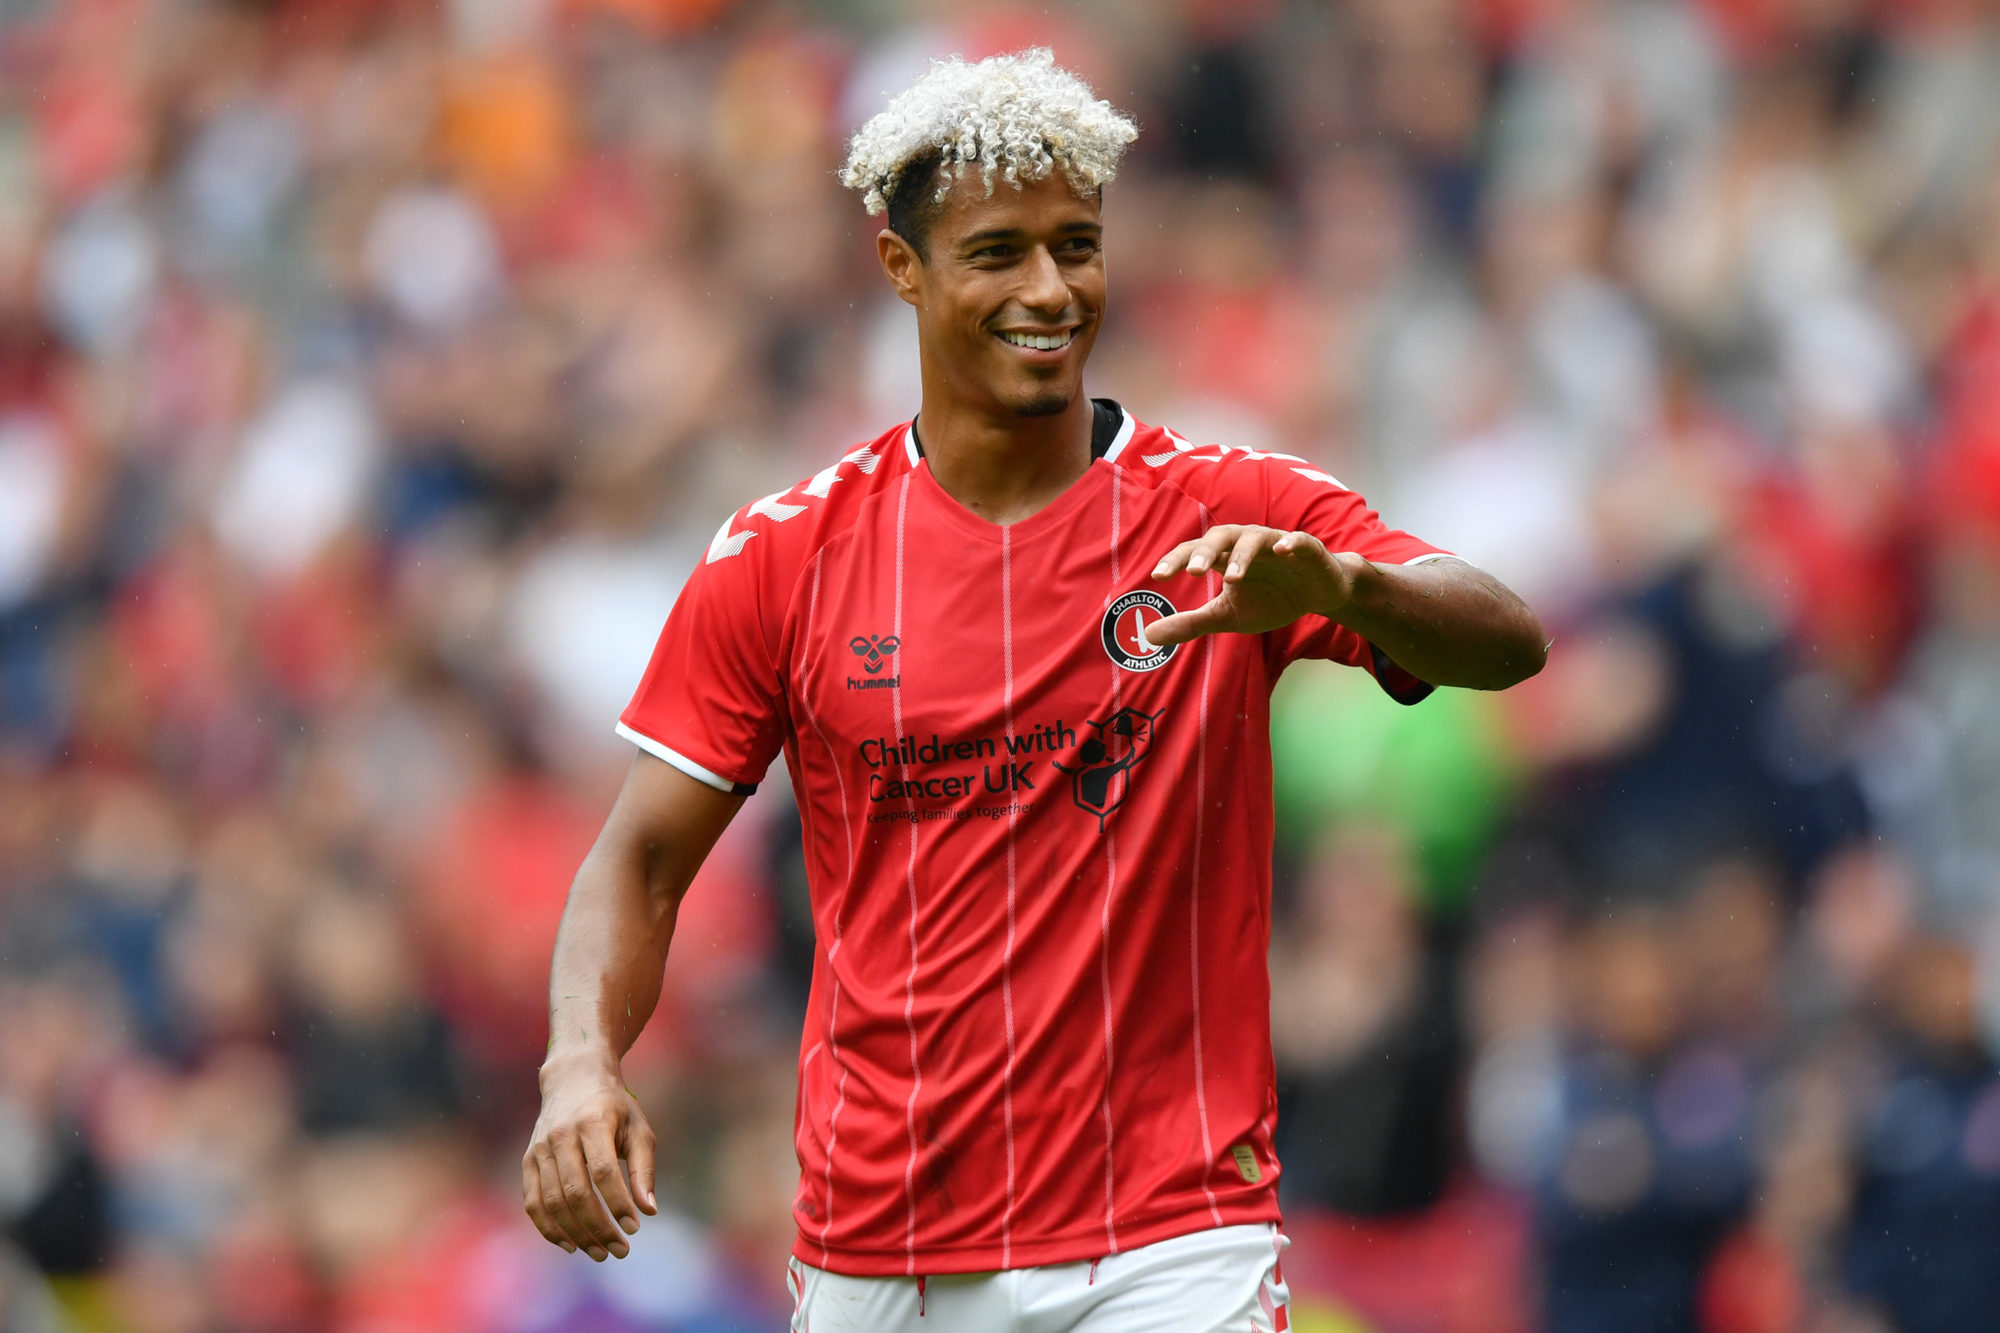 Charlton Athletic striker Lyle Taylor in action. (Getty Images)